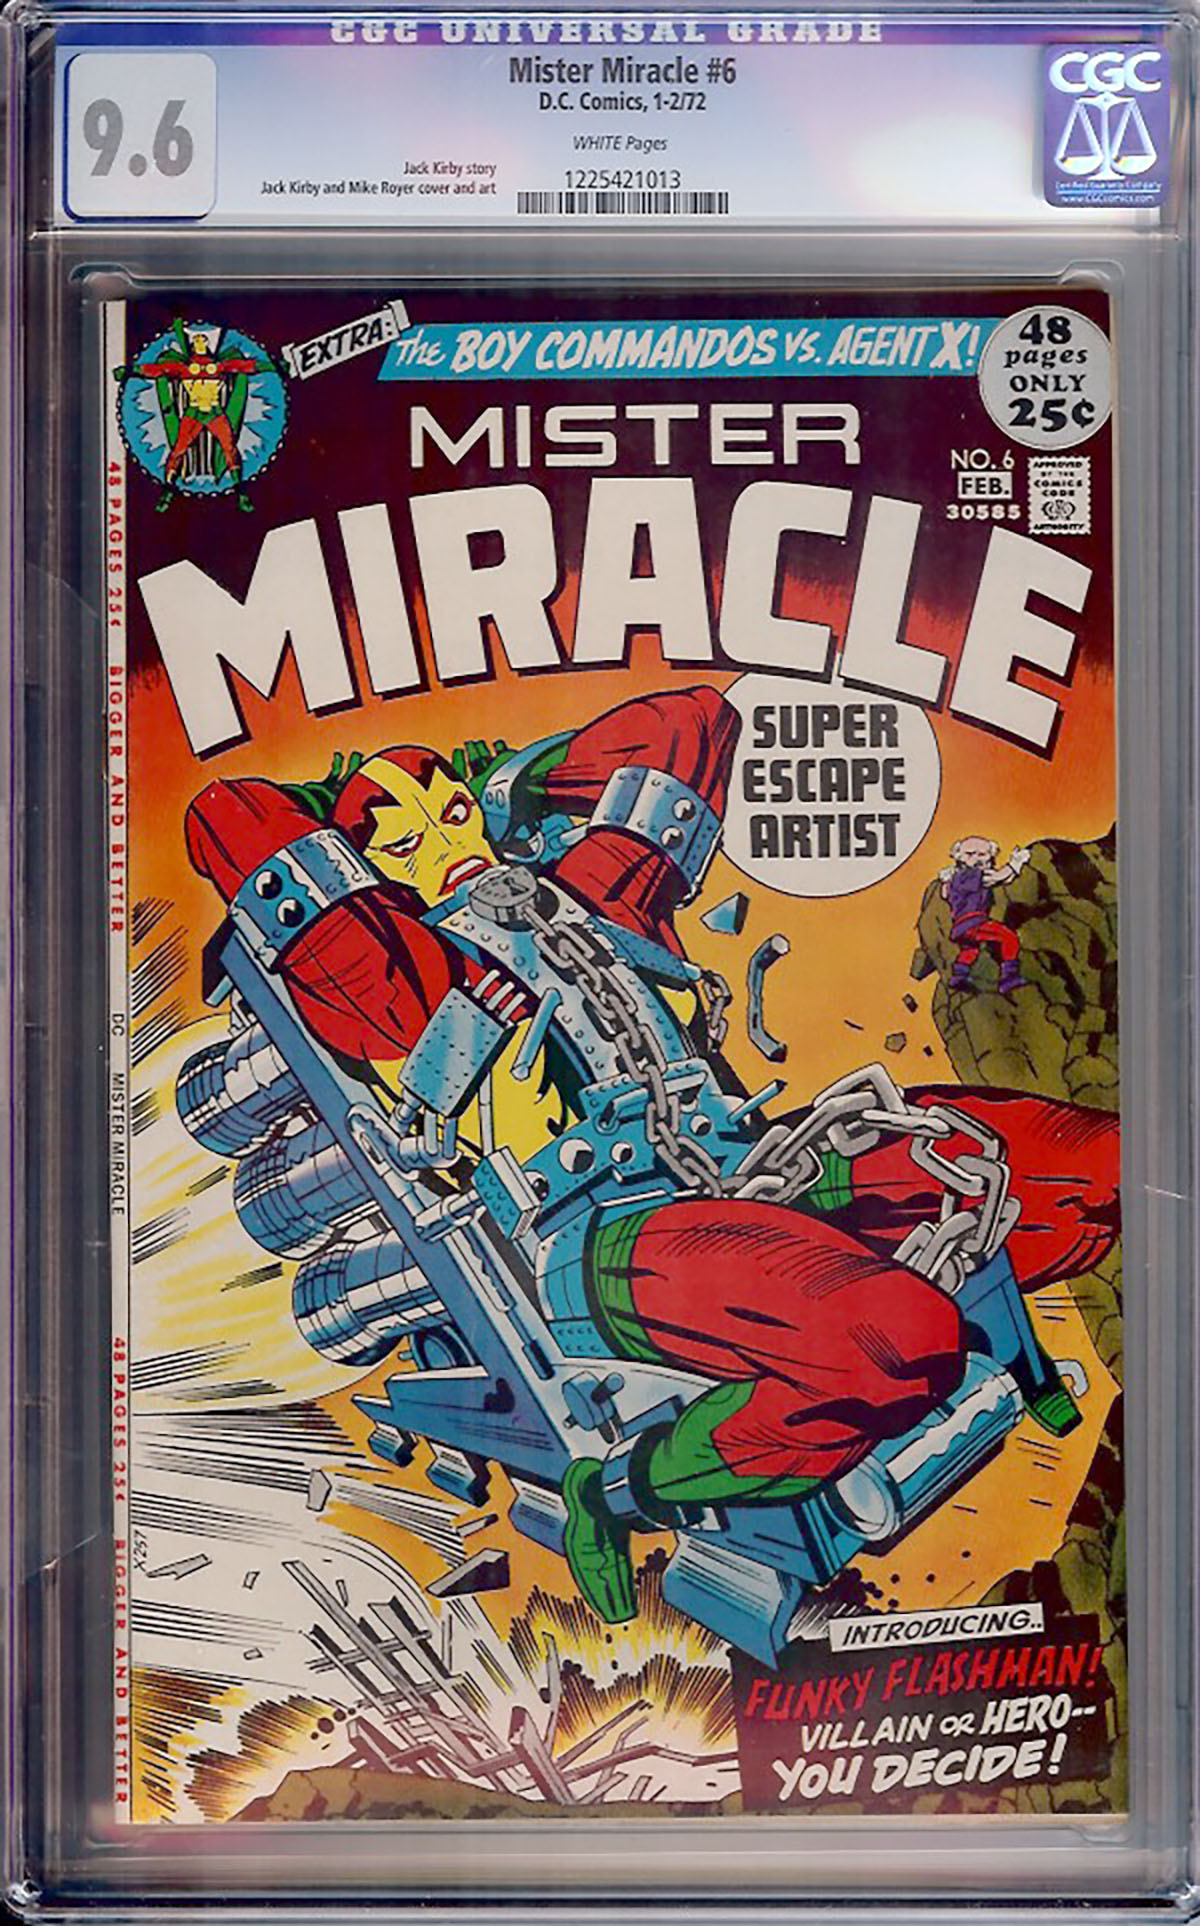 Mister Miracle #6 CGC 9.6 w